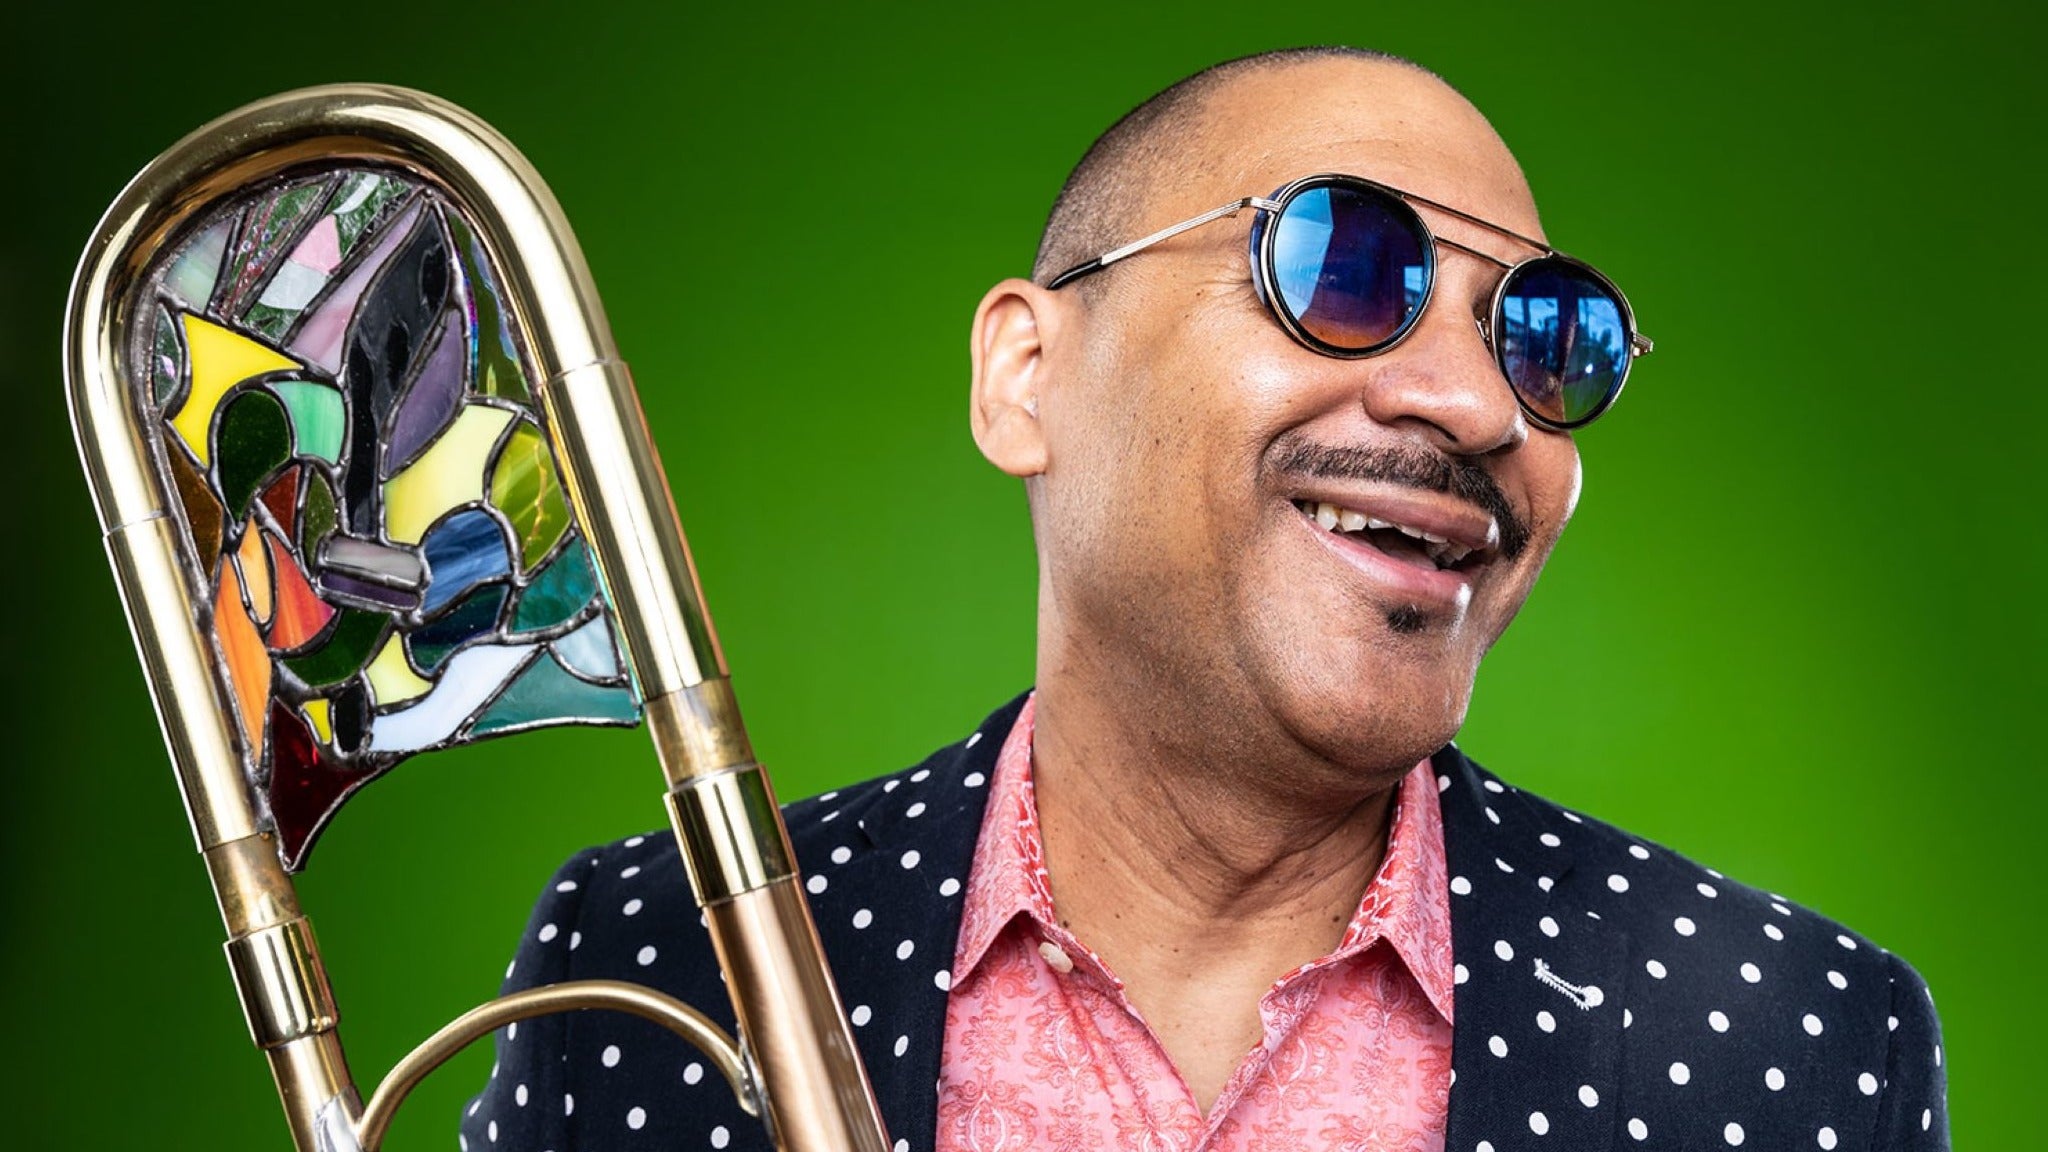 Image used with permission from Ticketmaster | Delfeayo Marsalis & The Uptown Jazz Orchestra tickets